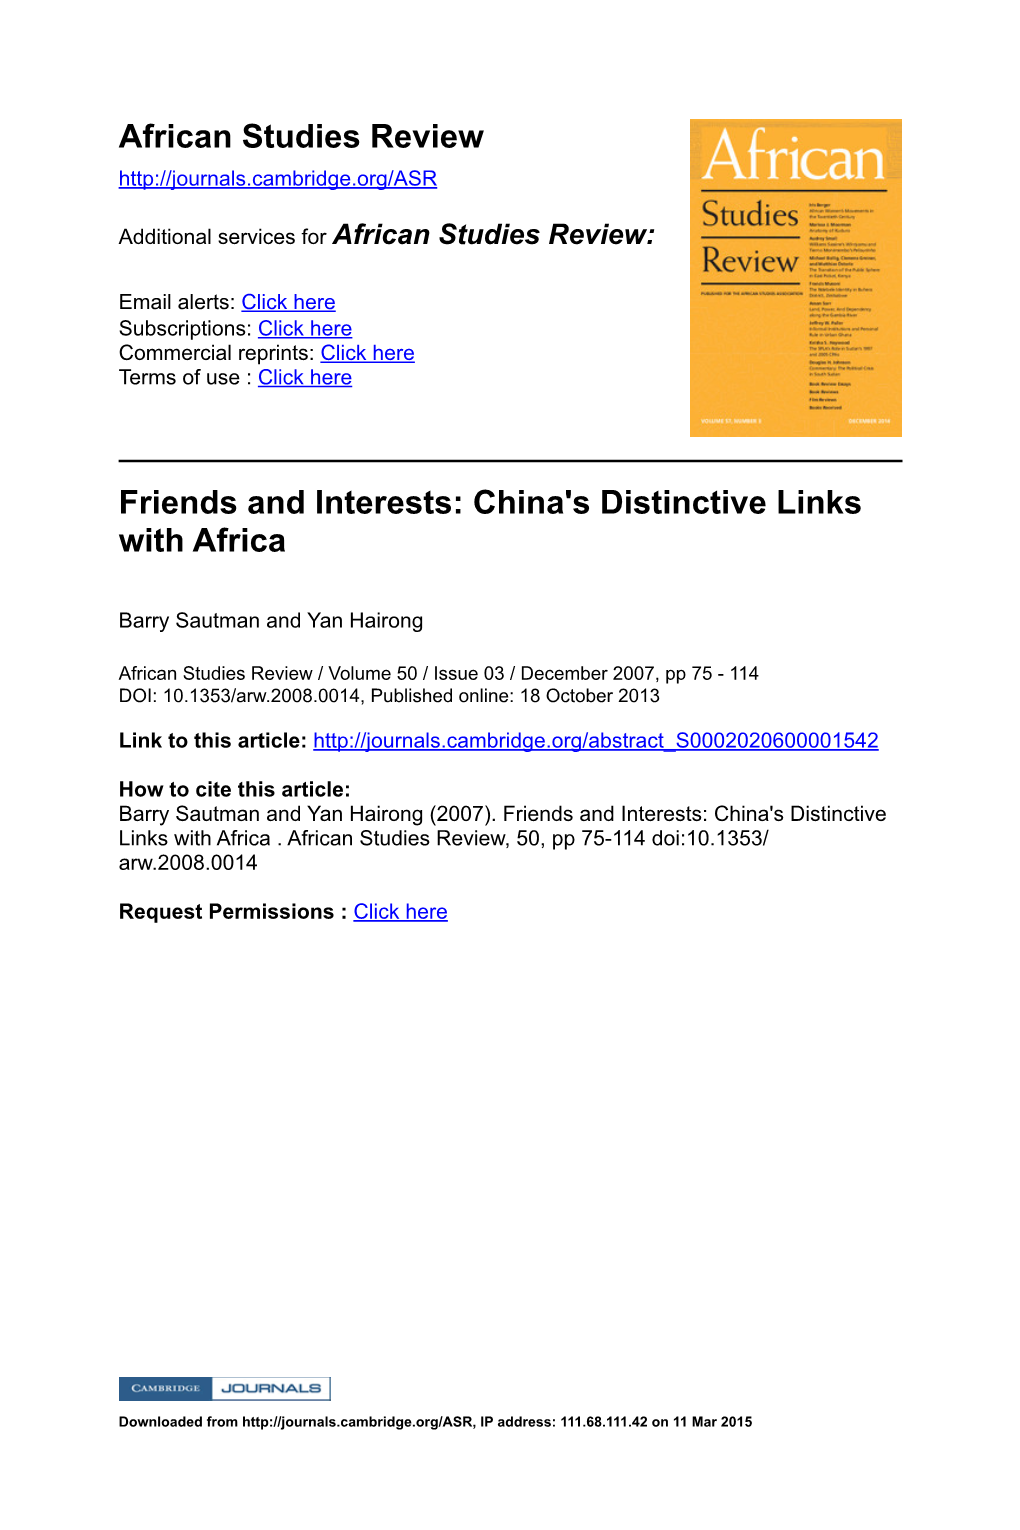 African Studies Review Friends and Interests: China's Distinctive Links